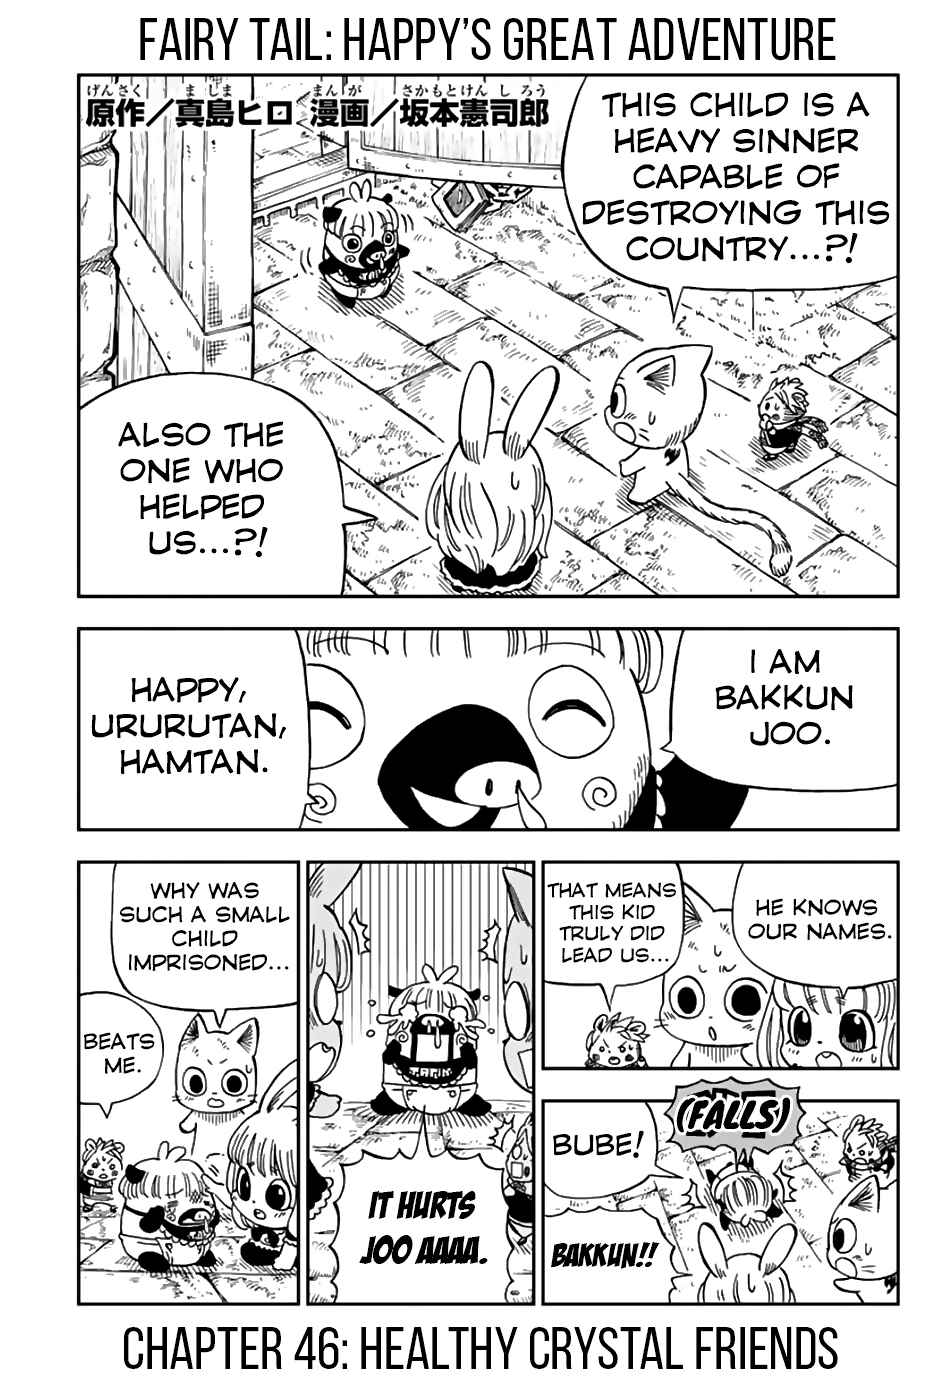 Fairy Tail: Happy's Great Adventure Ch. 46 Healthy Crystal Friends